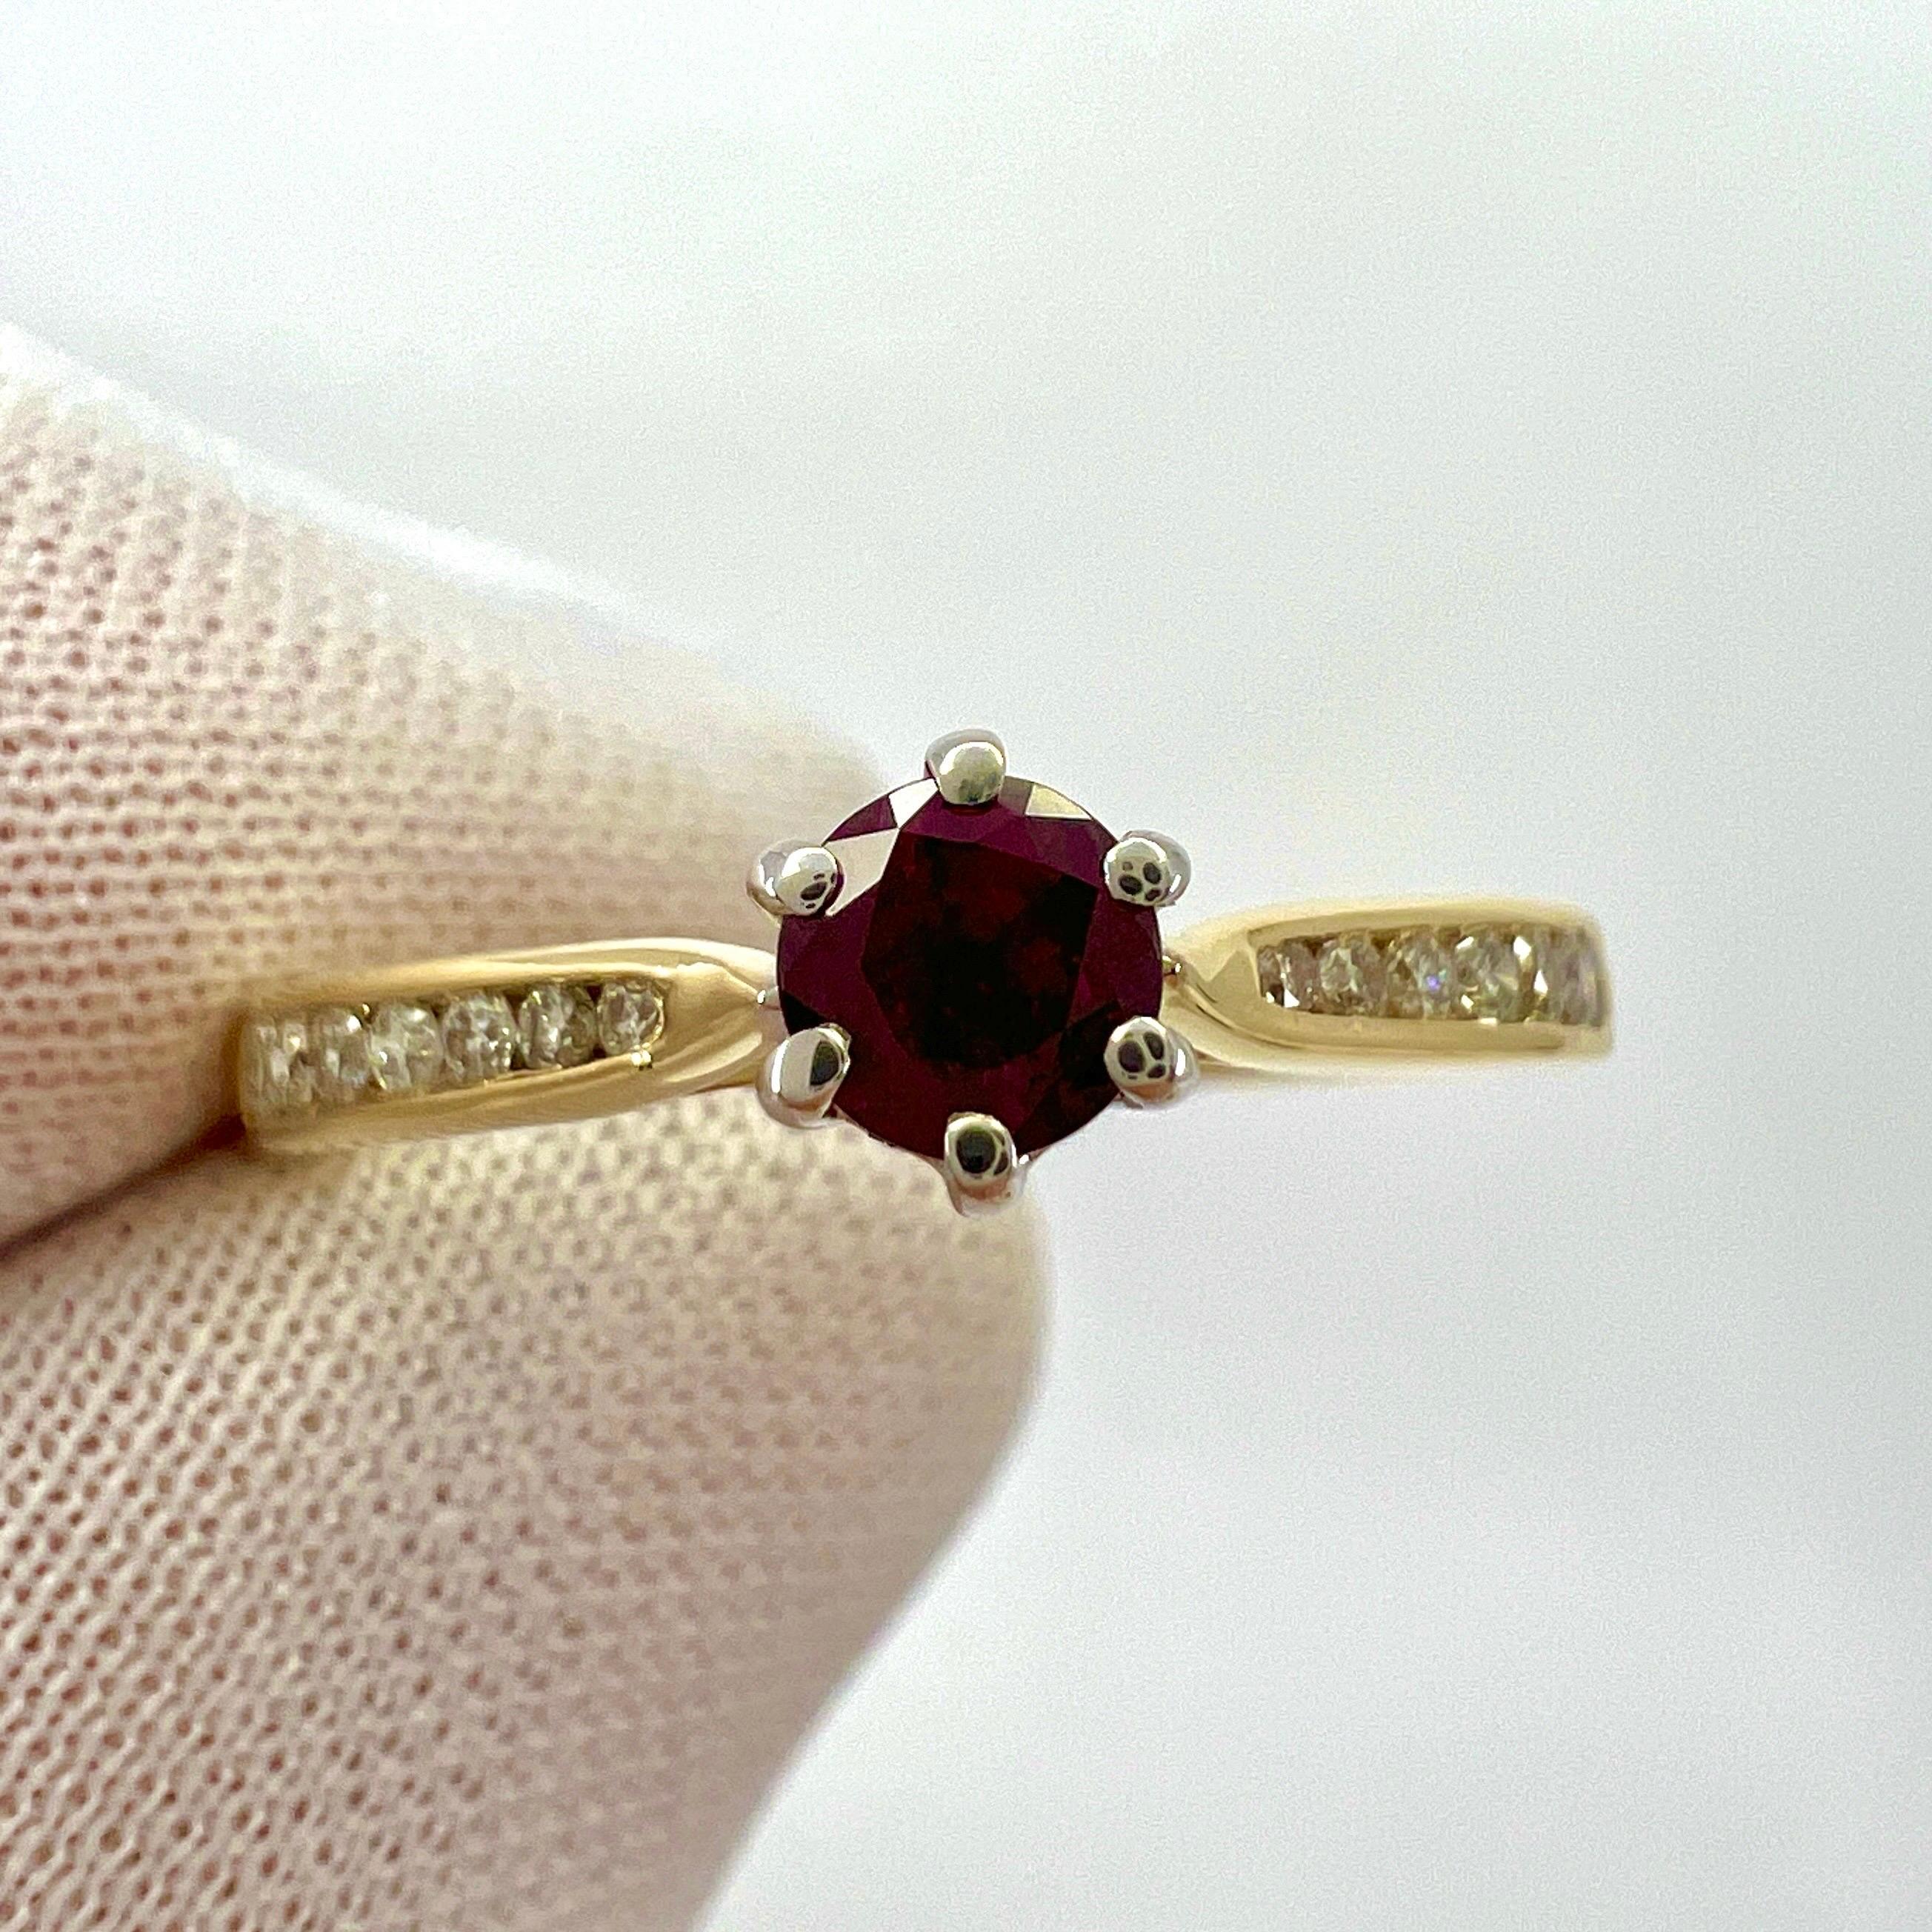 Natural Round Cut Red Ruby And Diamond White And Yellow Gold Ring.

0.60 Carat total. This ring features a beautiful red ruby with a deep red colour and excellent cut and clarity. The ruby measures 4mm (0.45 carat).

The ruby is accented by 0.15ct